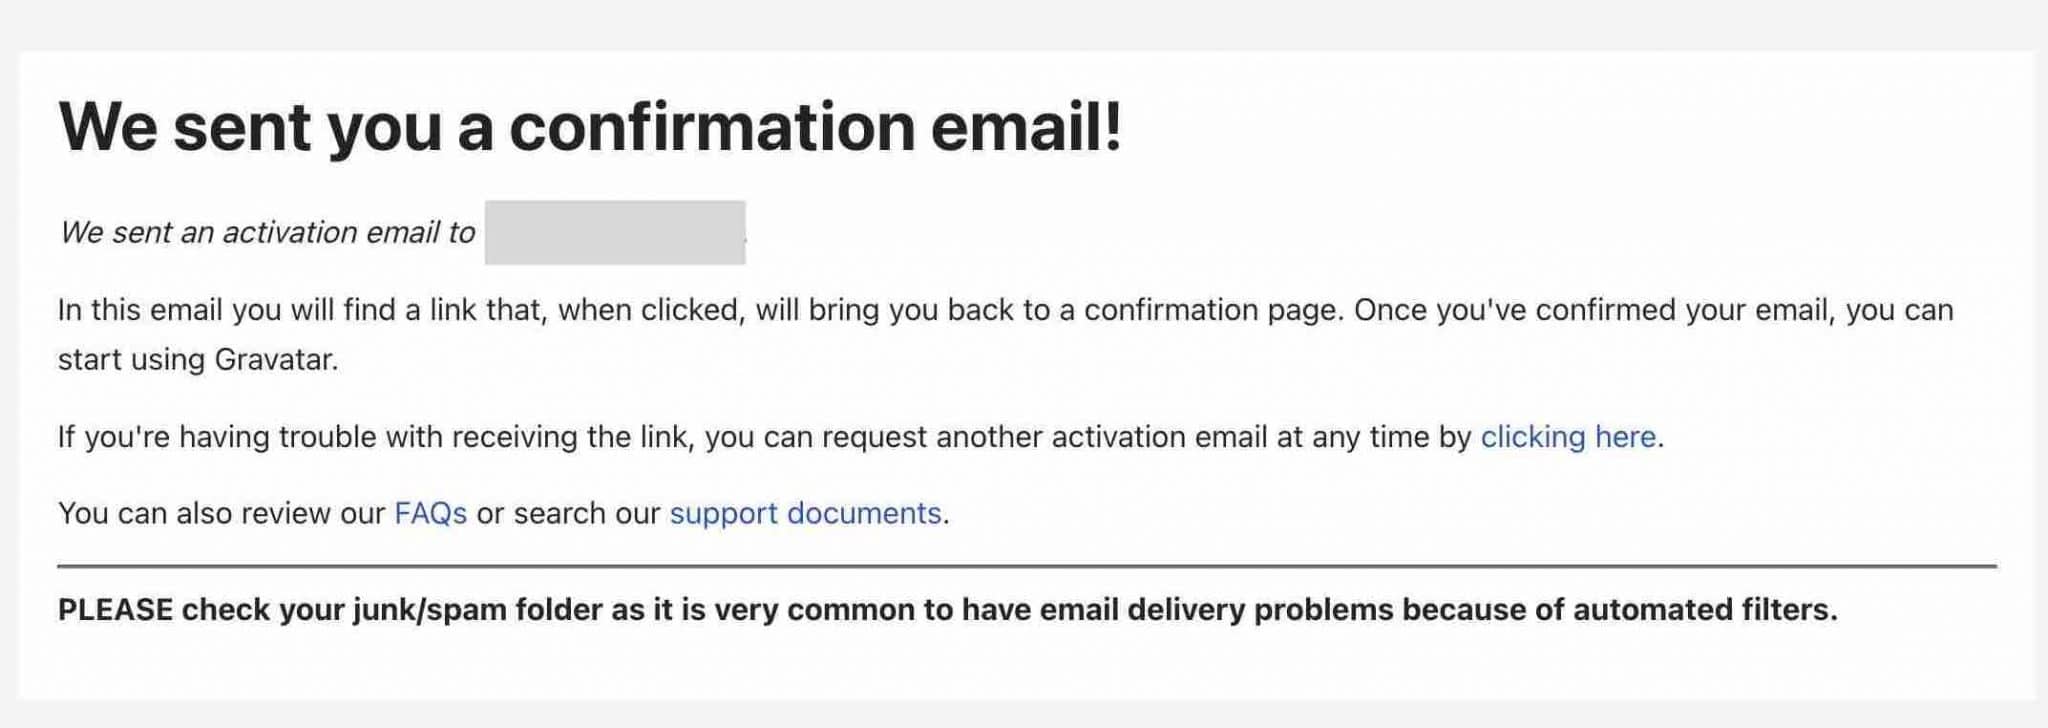 Confirmation email sent to start using Gravatar for WordPress.